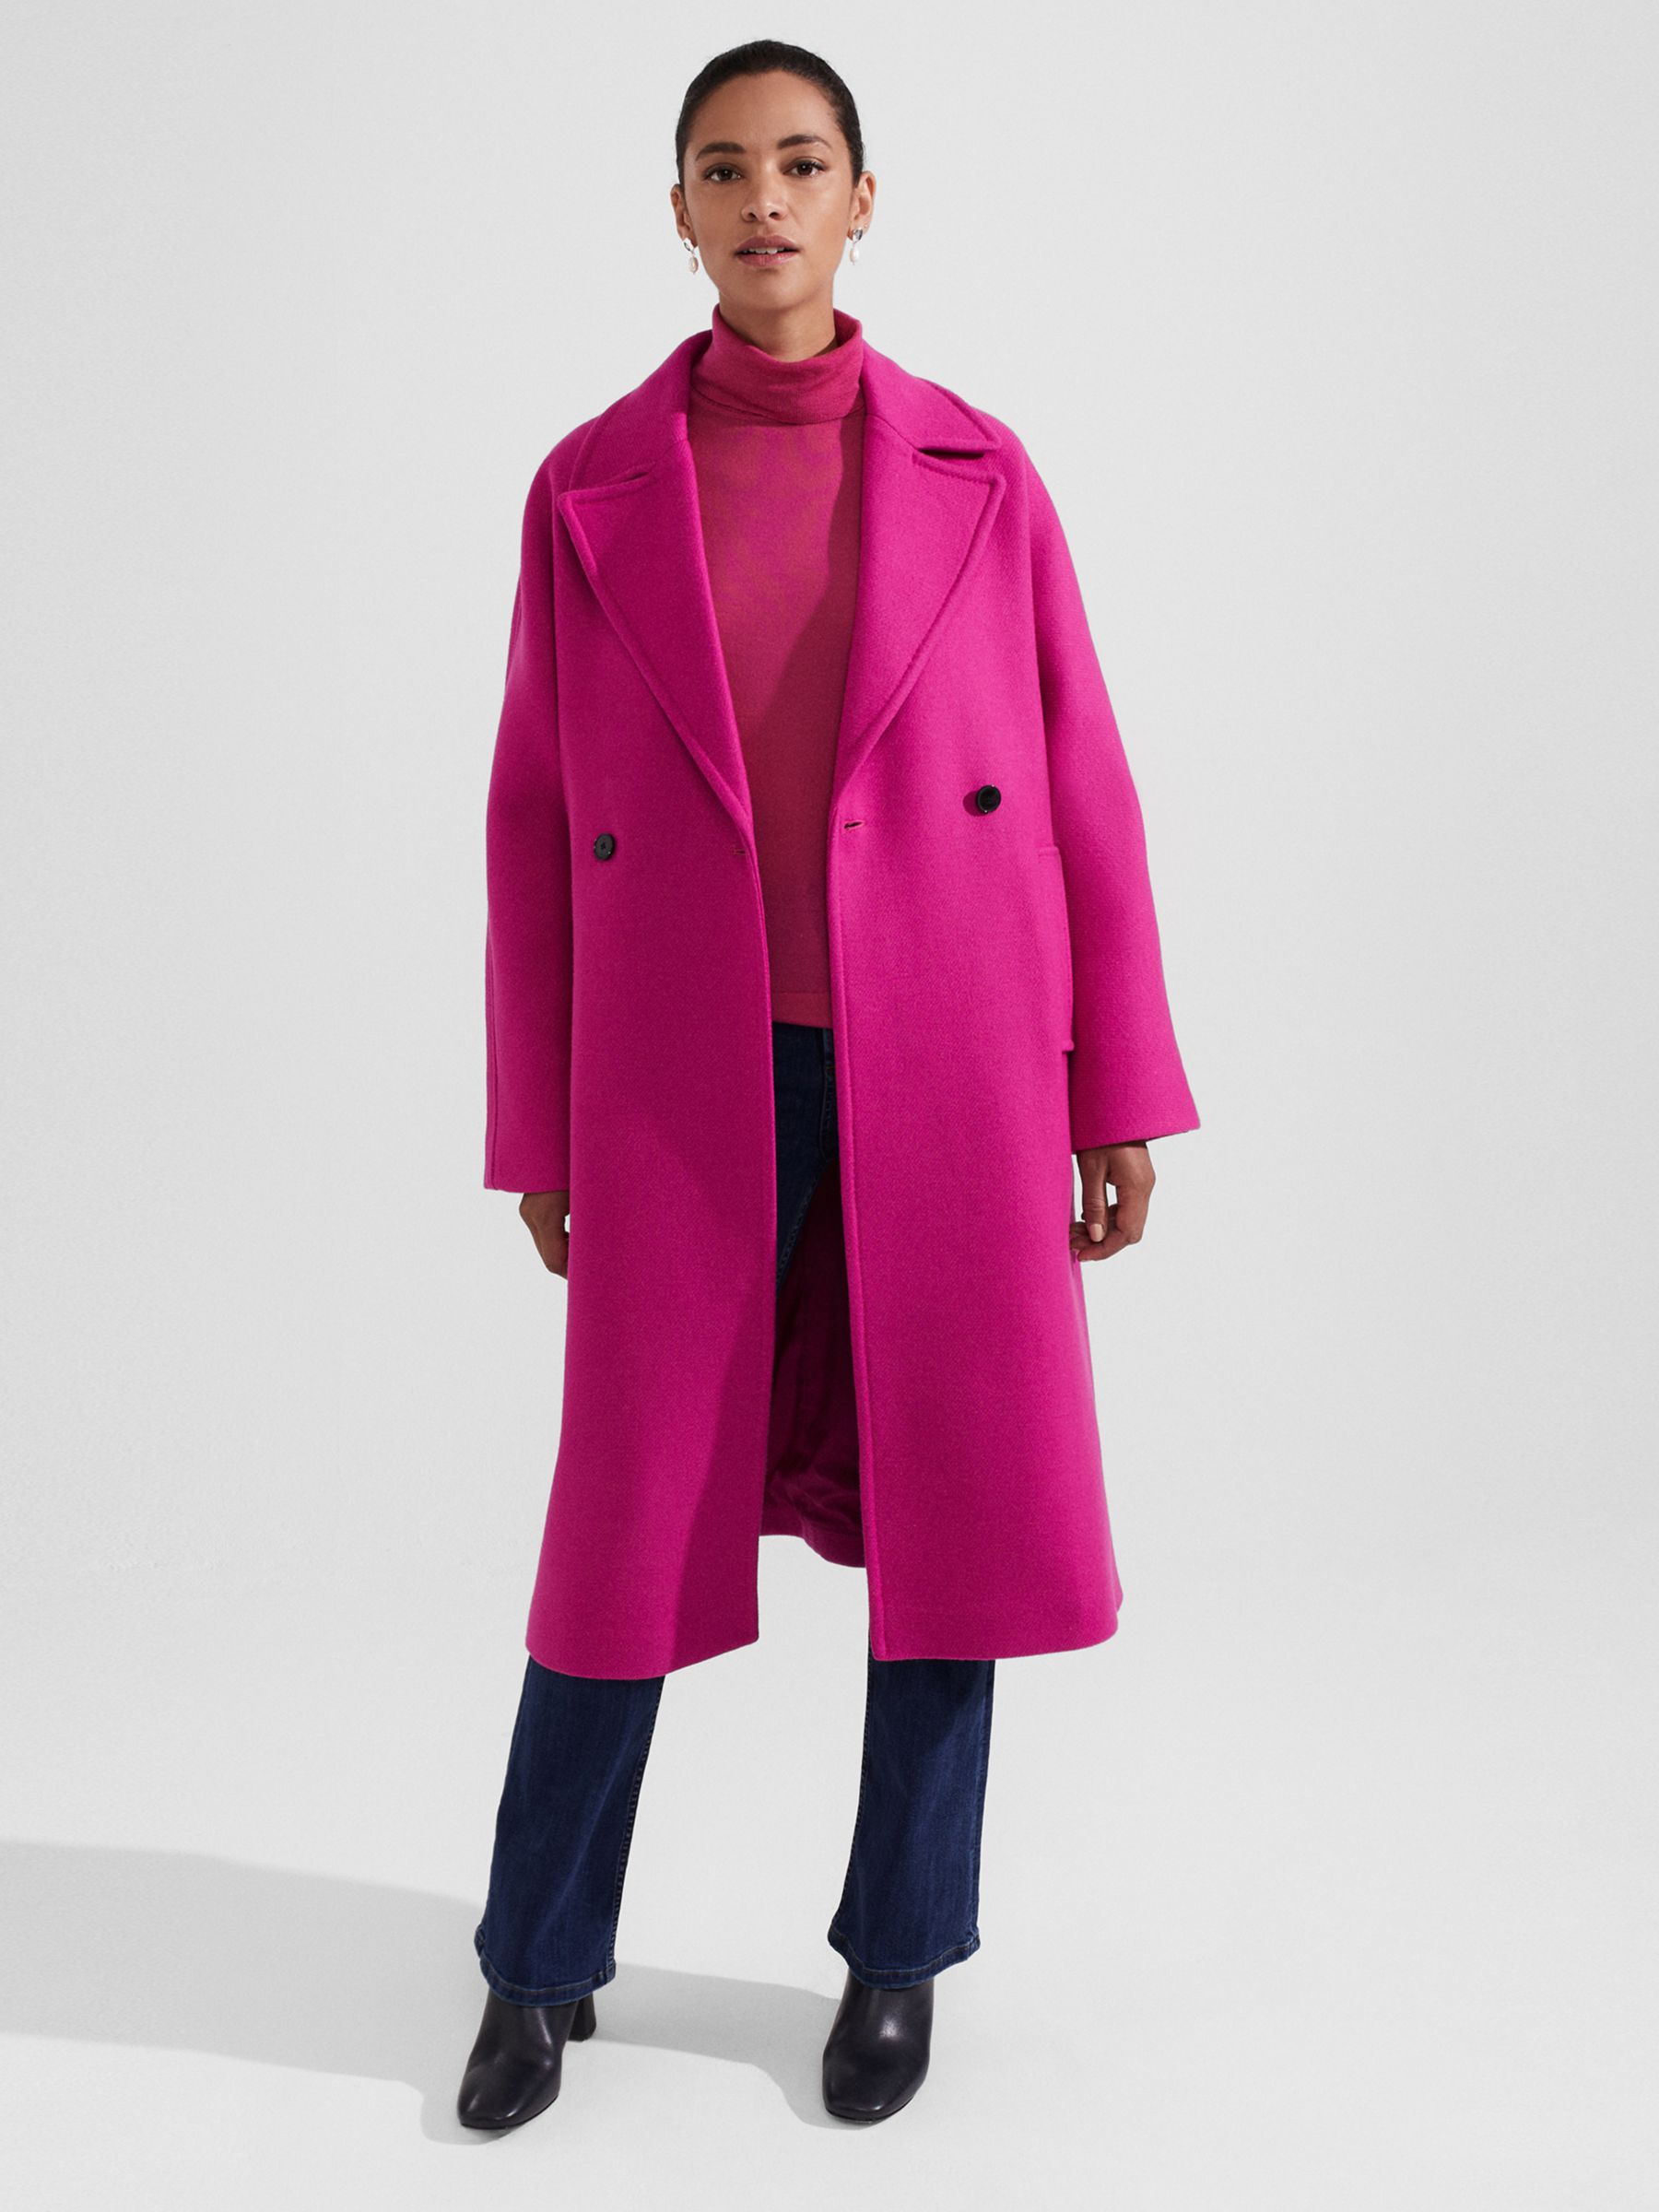 Hobbs Carine Wool Blend Relaxed Fit Coat, Bright Pink at John Lewis ...